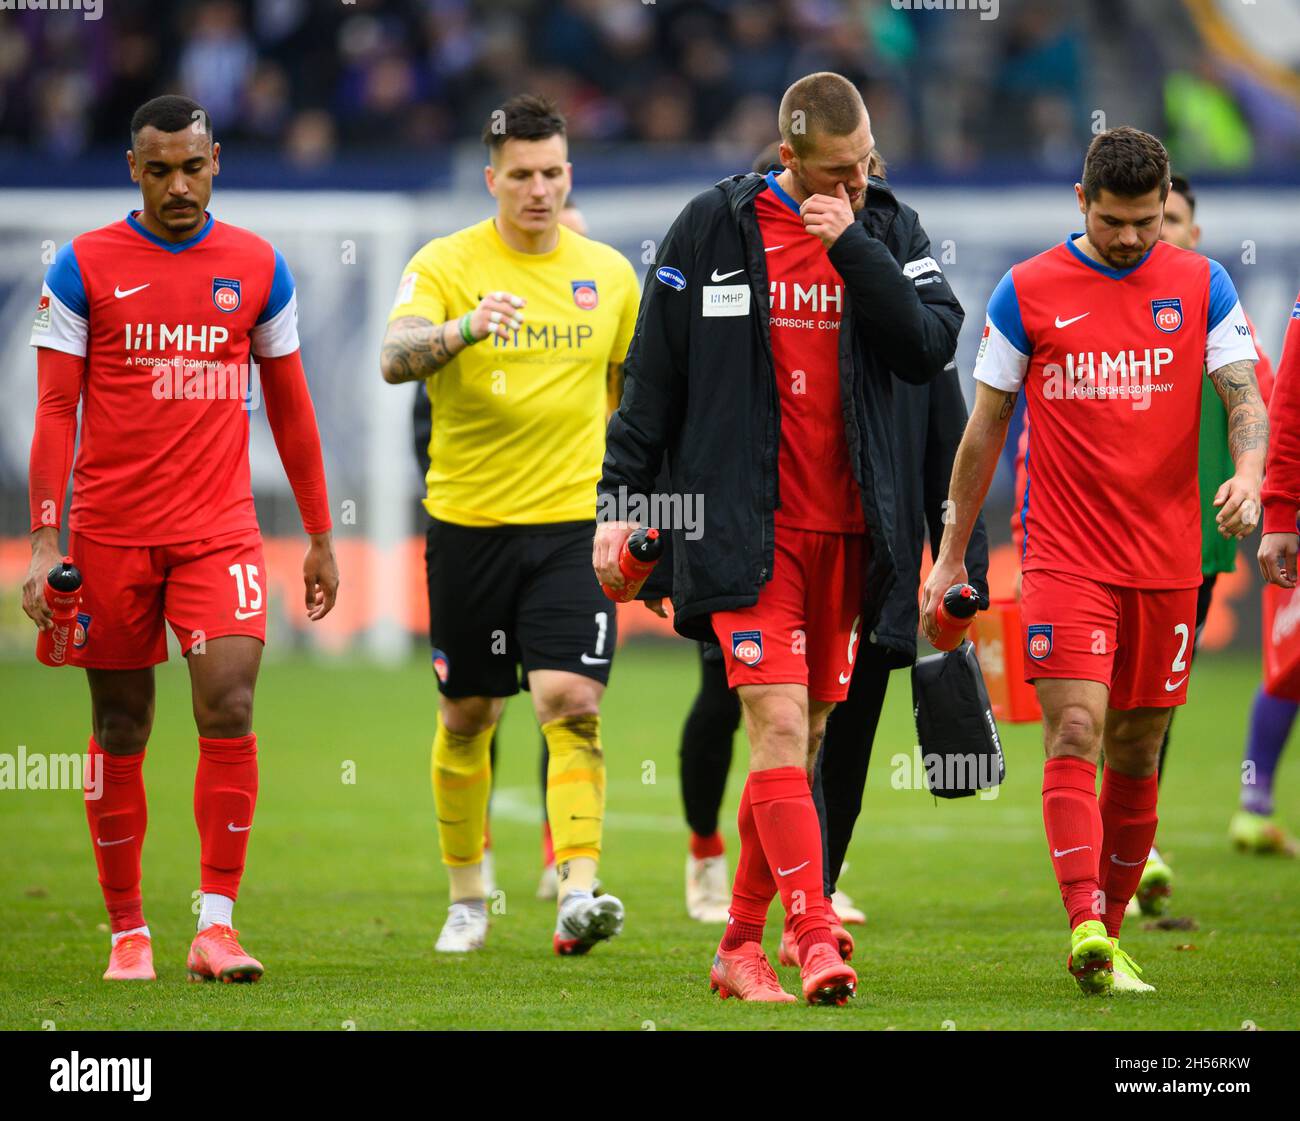 07 November 2021, Saxony, Aue: Football: 2. Bundesliga, Erzgebirge Aue - 1. FC Heidenheim, Matchday 13, Erzgebirgsstadion. Heidenheim's Maurice Malone (l-r), goalkeeper Kevin Müller, Patrick Mainka and Marnon Busch disappointed after the defeat. Photo: Robert Michael/dpa-Zentralbild/dpa - IMPORTANT NOTE: In accordance with the regulations of the DFL Deutsche Fußball Liga and/or the DFB Deutscher Fußball-Bund, it is prohibited to use or have used photographs taken in the stadium and/or of the match in the form of sequence pictures and/or video-like photo series. Stock Photo